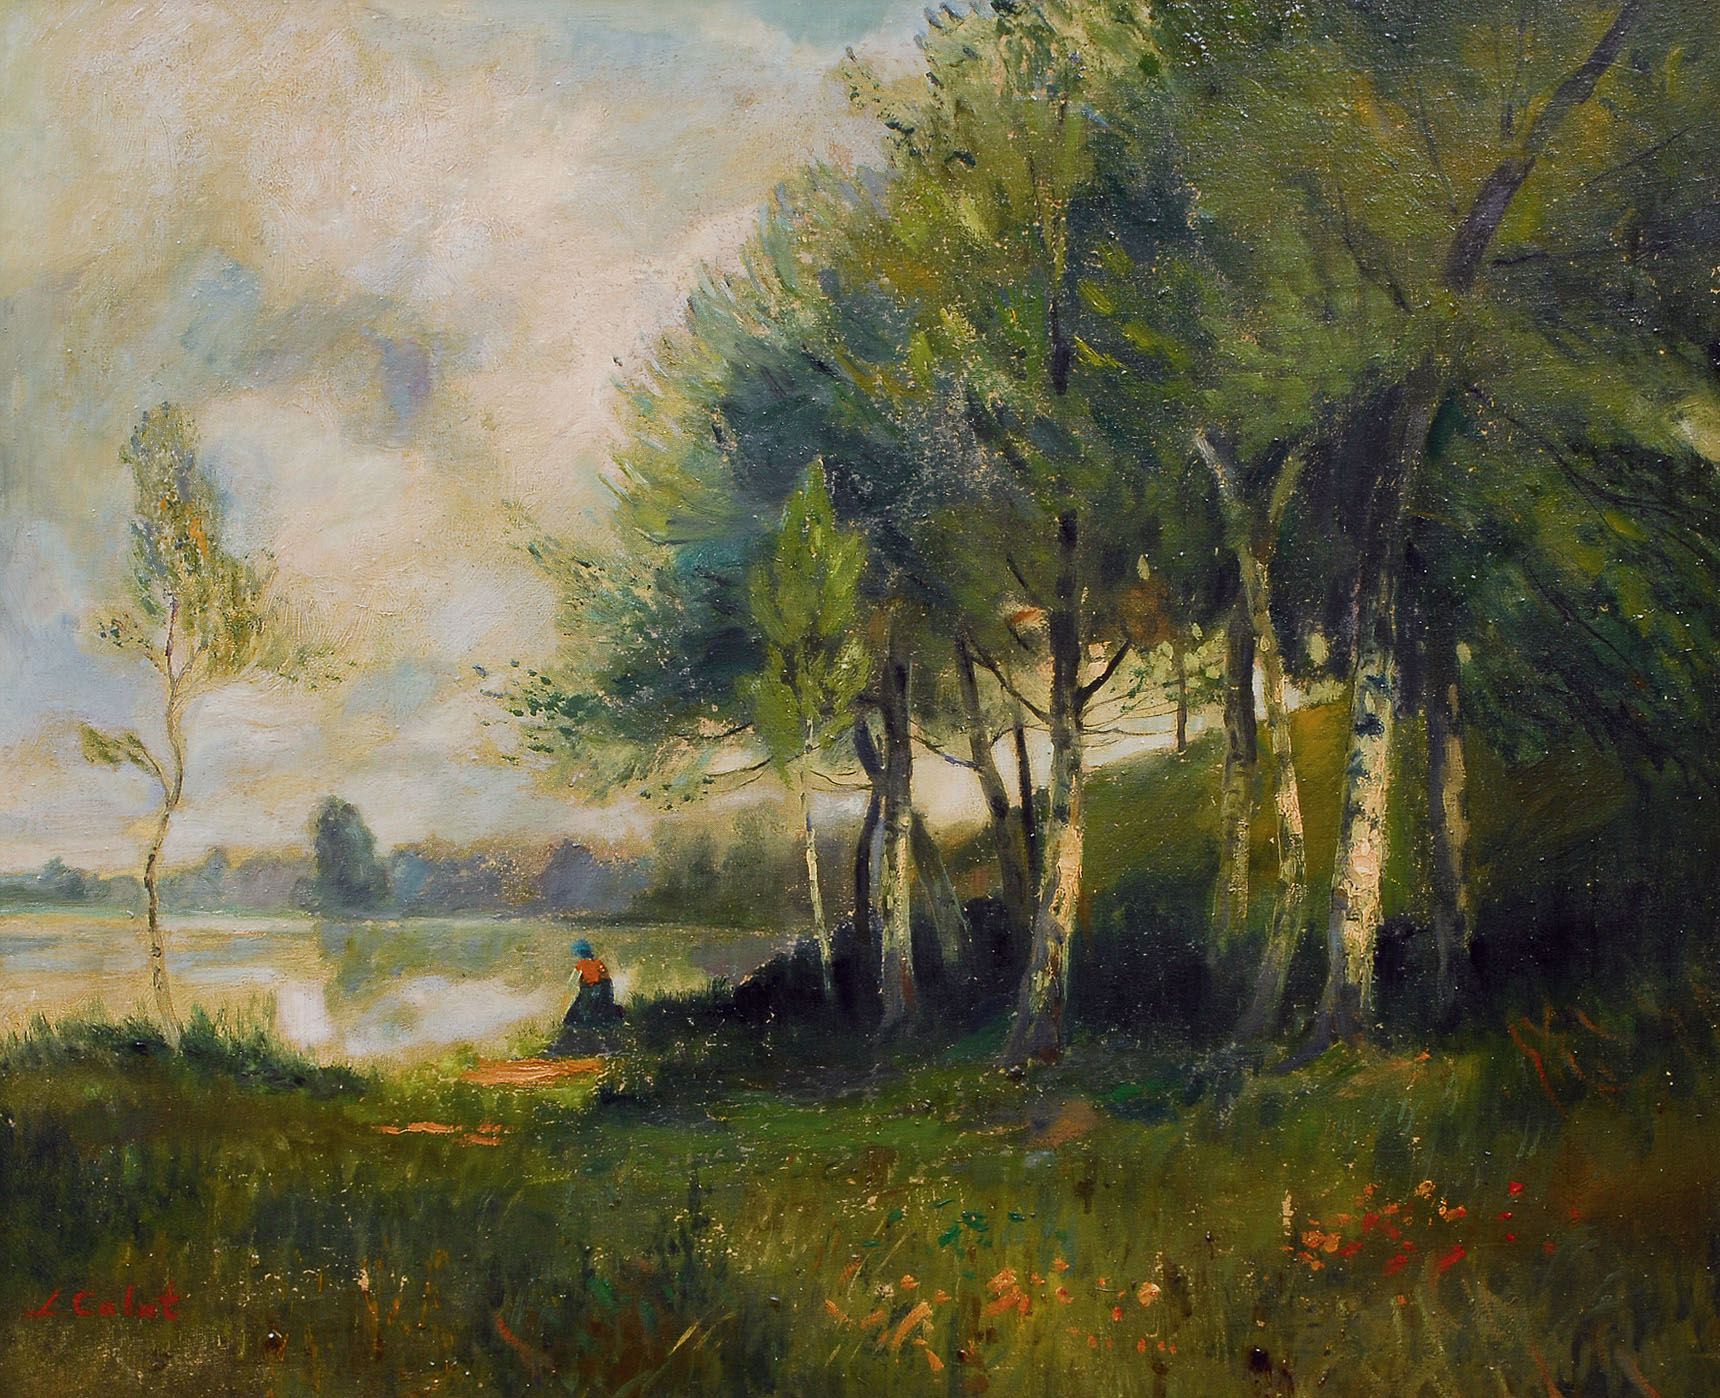 Landscape with lake and birches